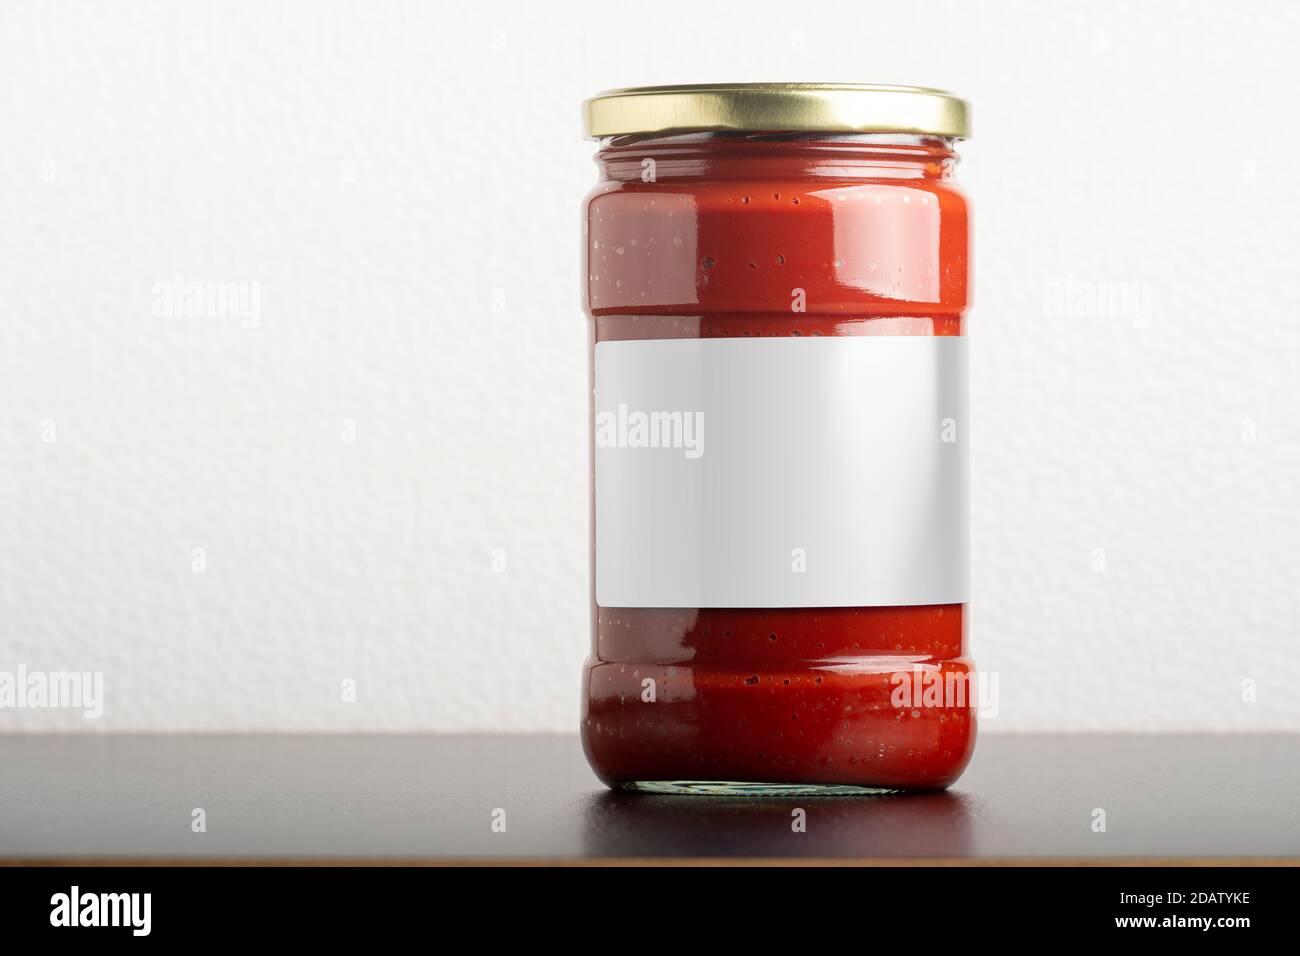 Tomato paste glassy jar with round cap on black table, editable mock-up series template ready for your design, label selection path included. Stock Photo